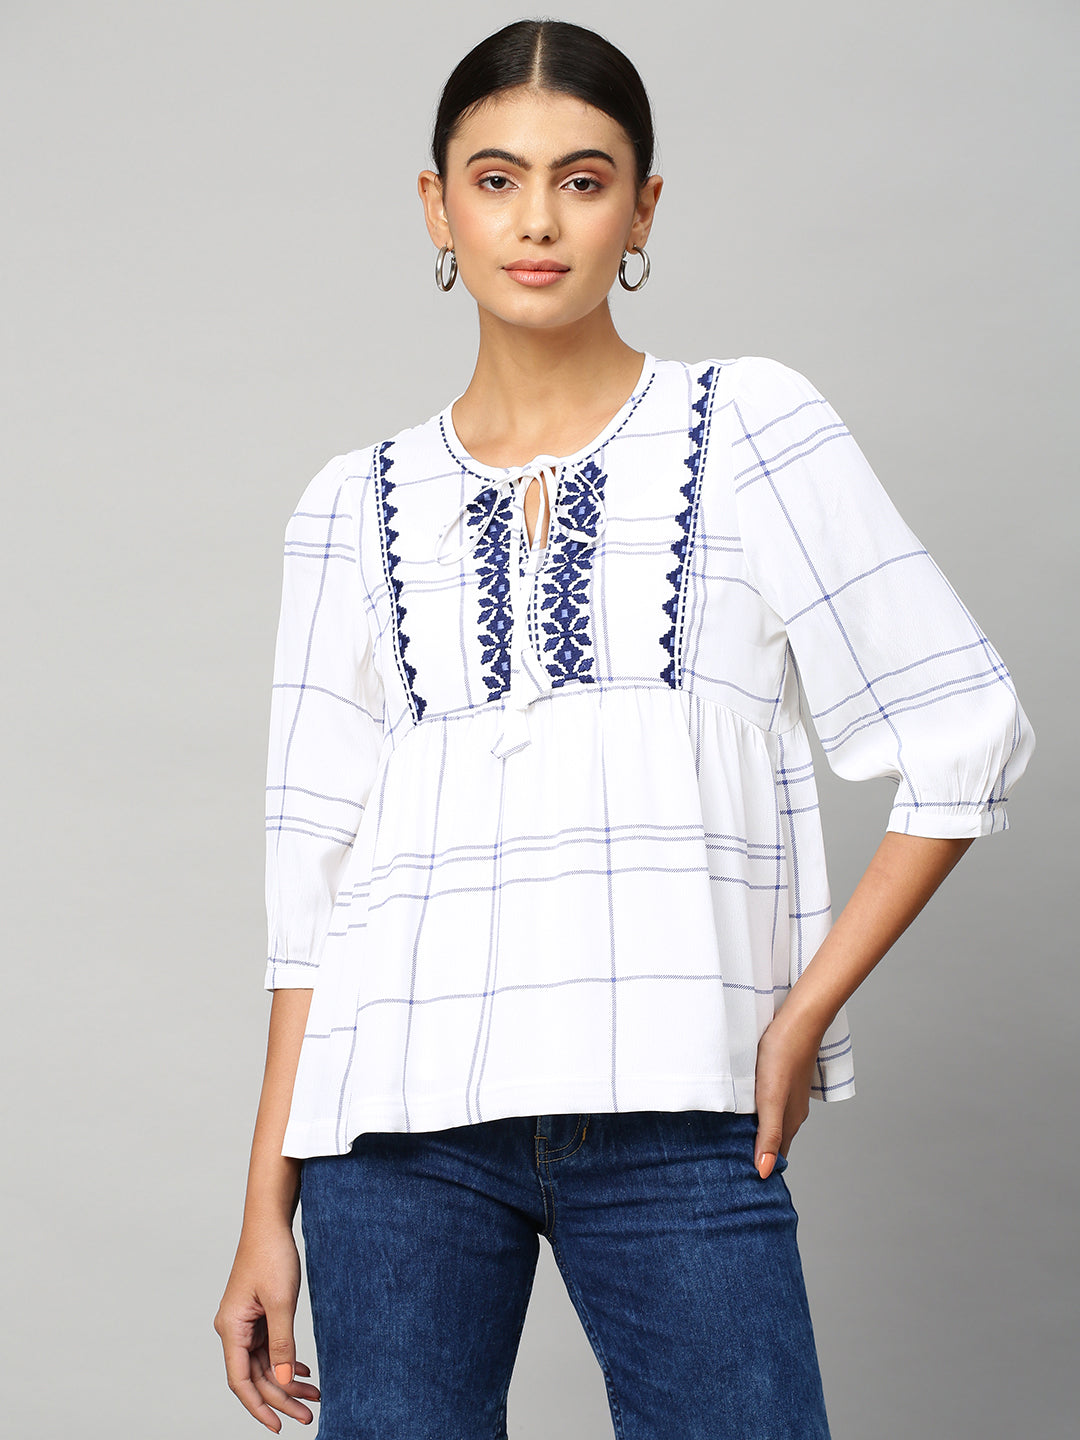 Embroidered Viscose Crepe Top